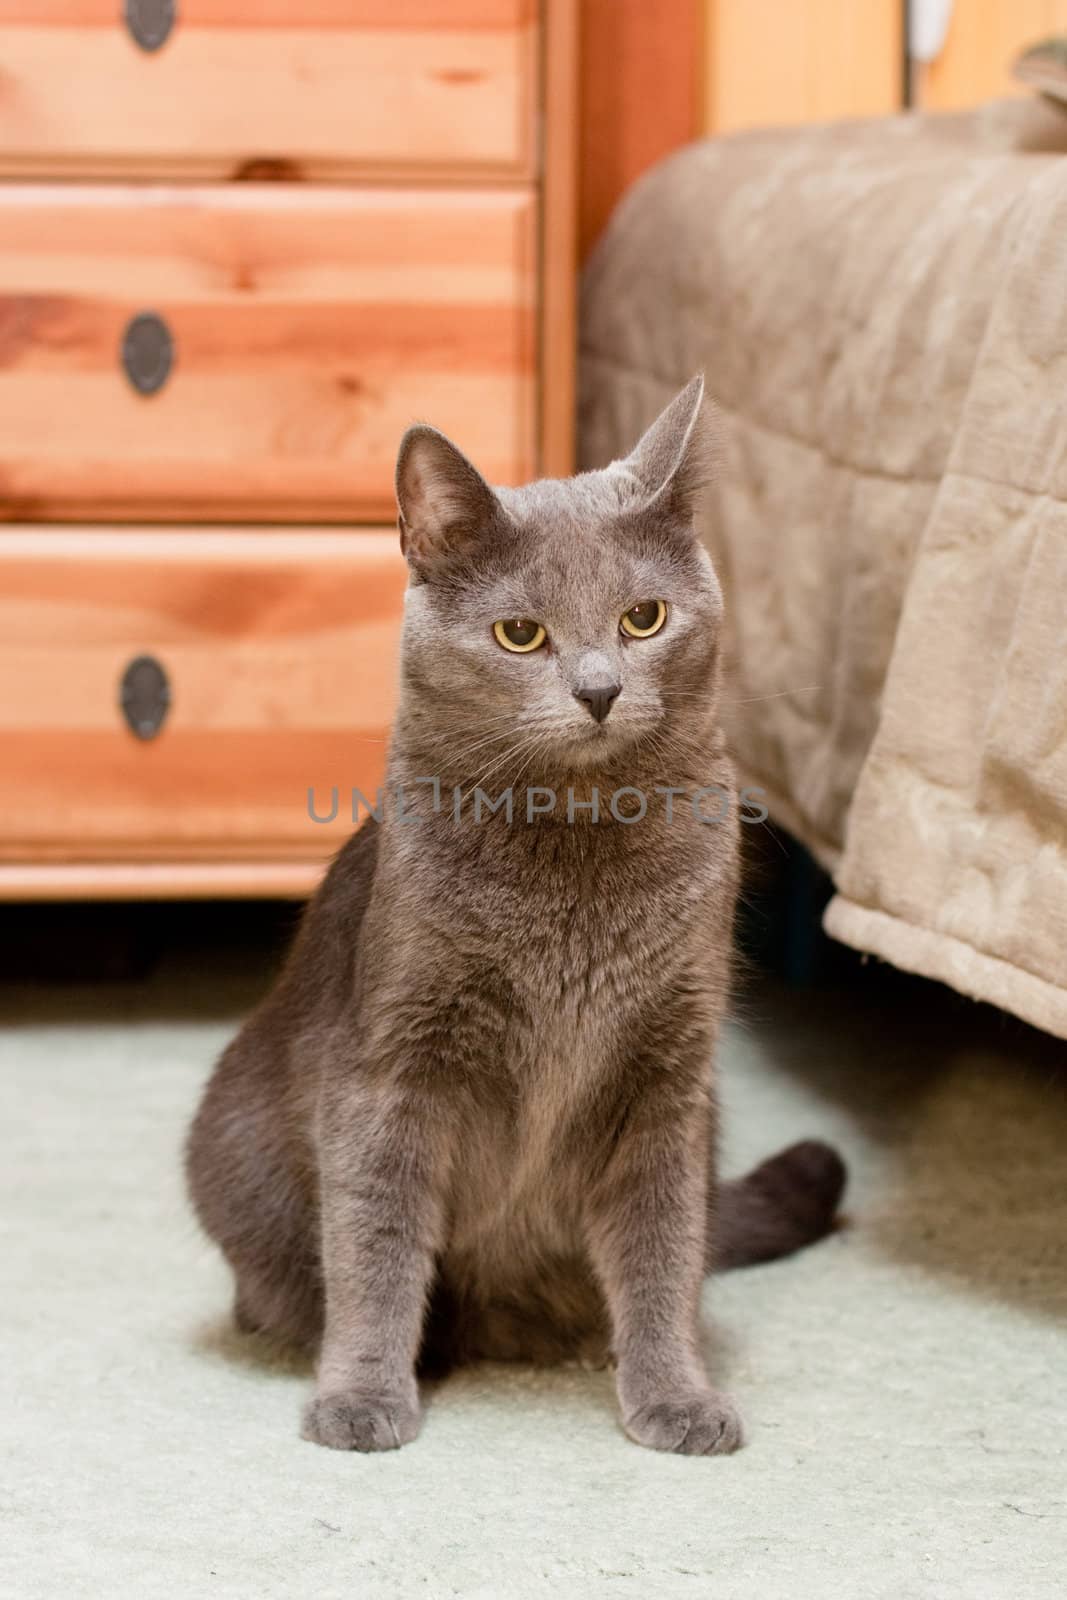 A gray cat sitting on the floor near bed
